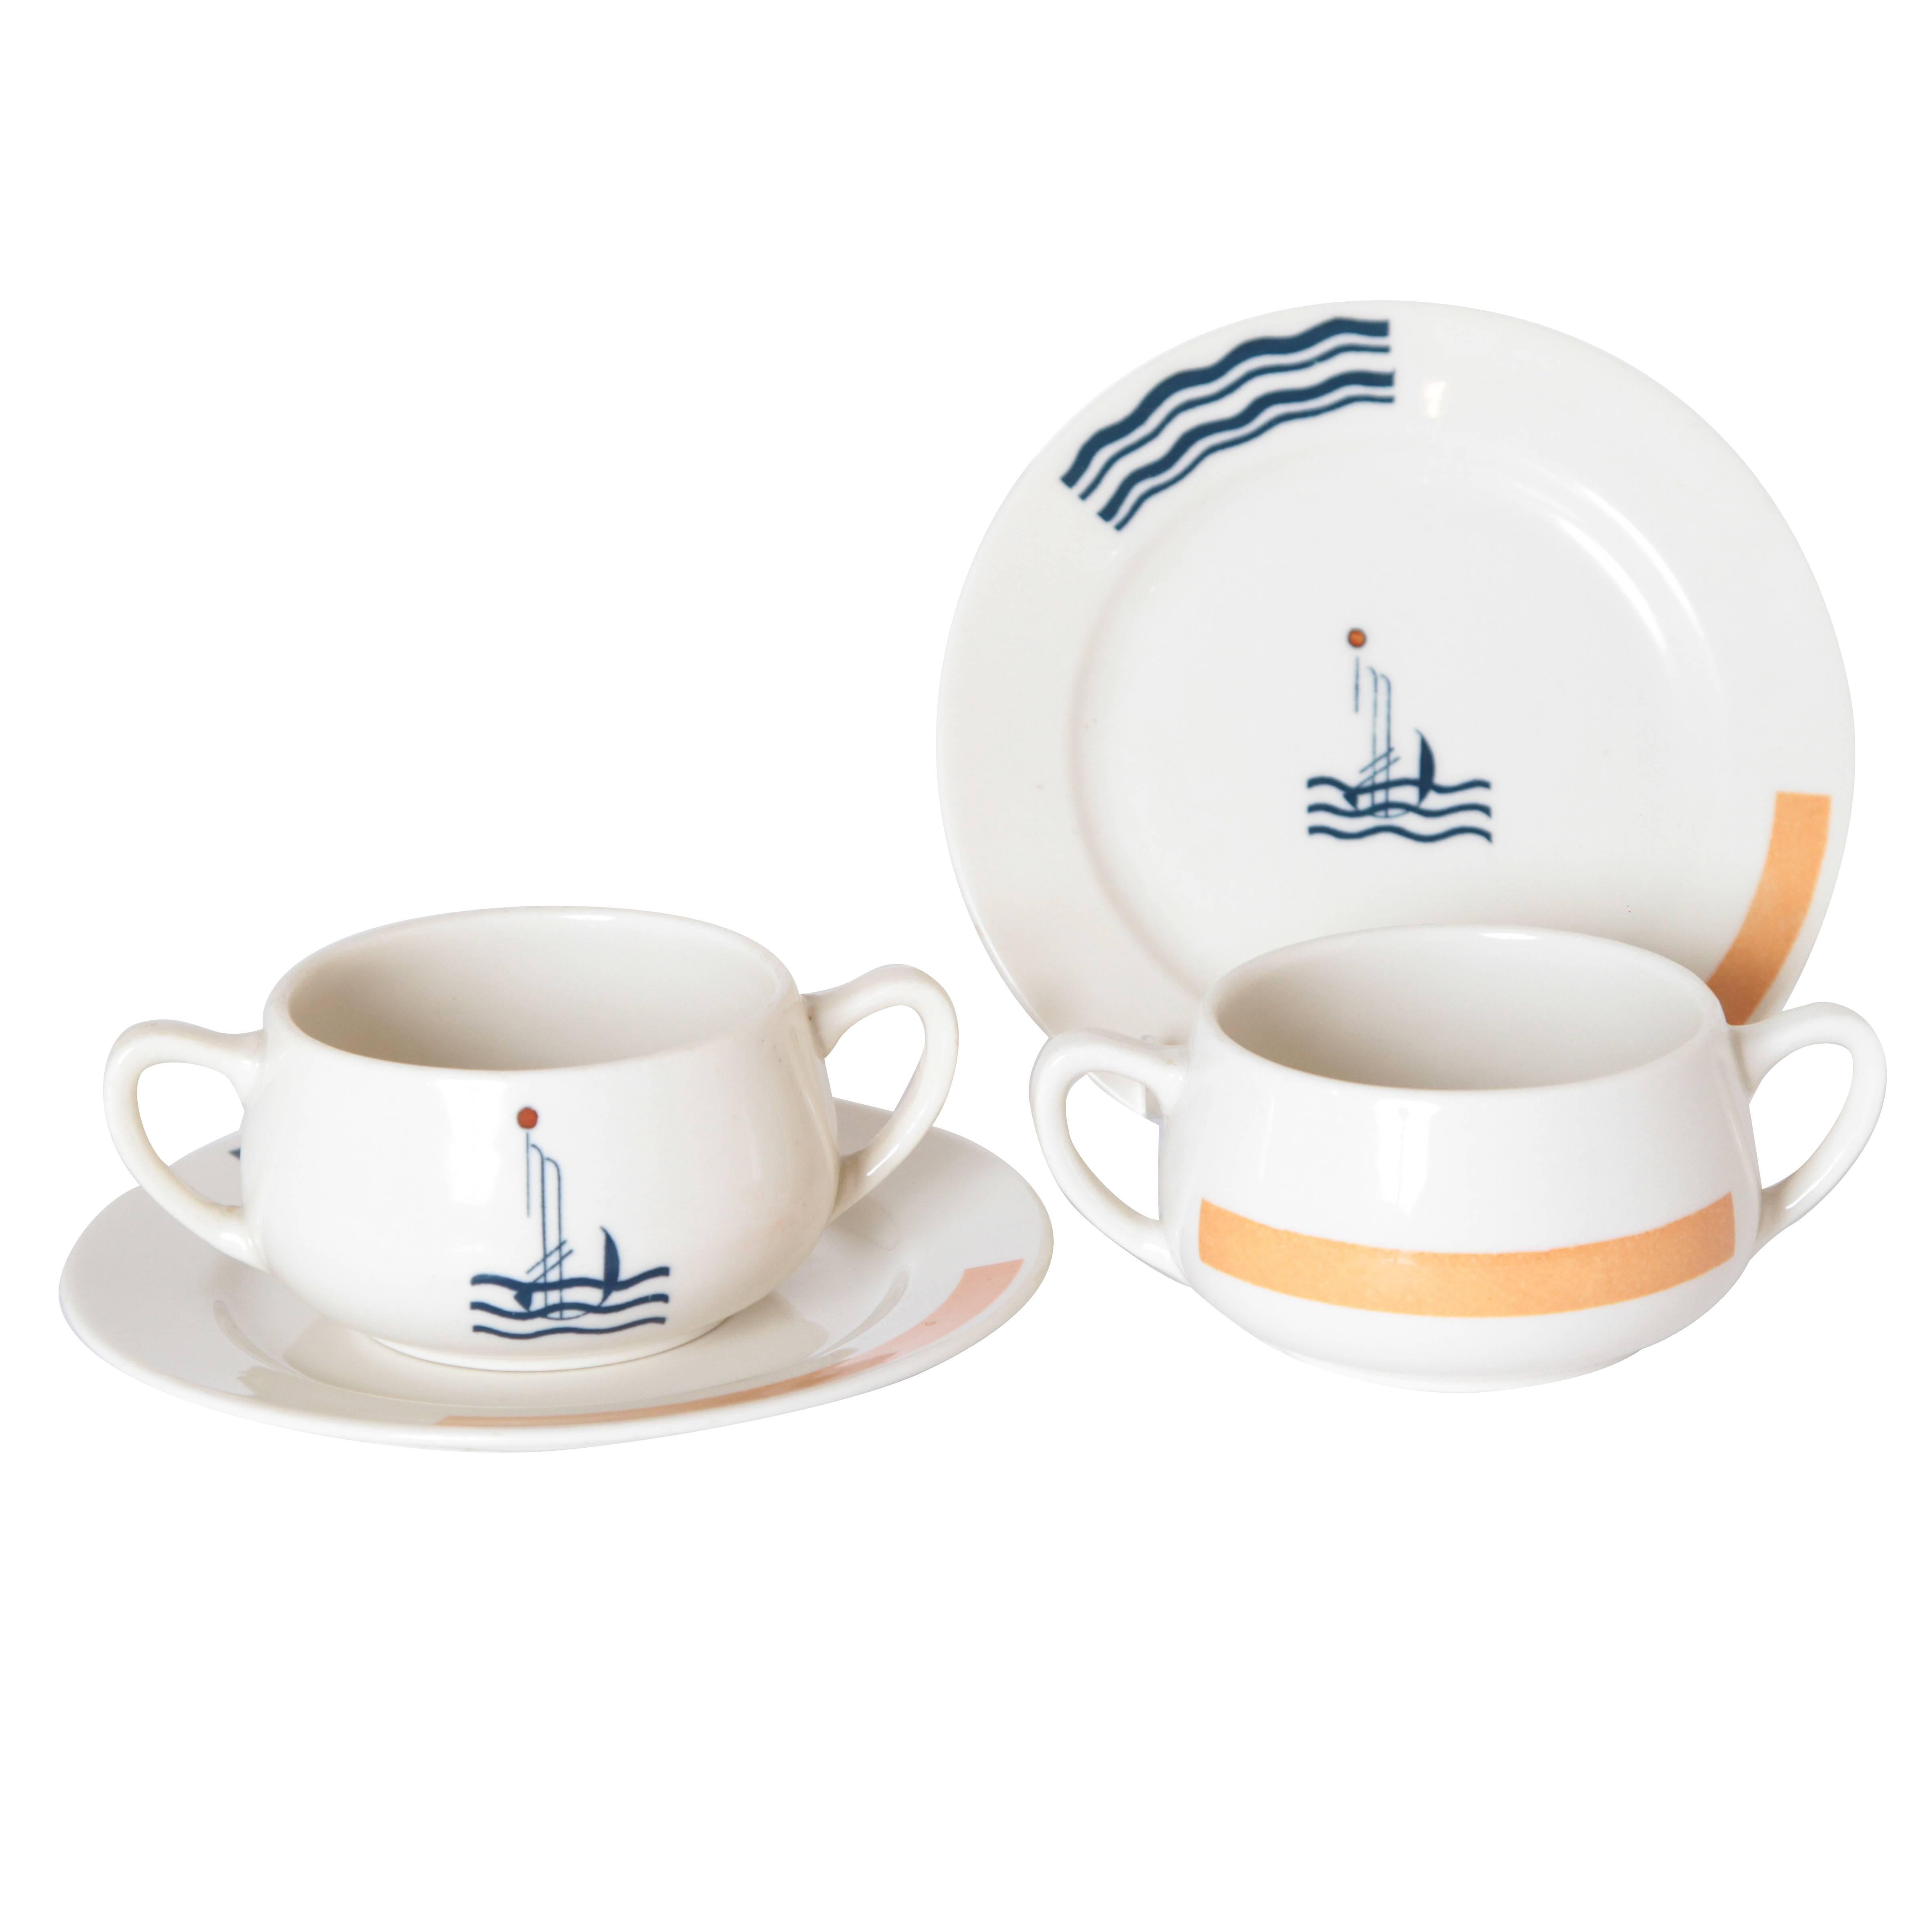 Art Deco S.S. Leviathan Two-Piece Matched Pairs Serveware, Eugene and Lee Schoen For Sale